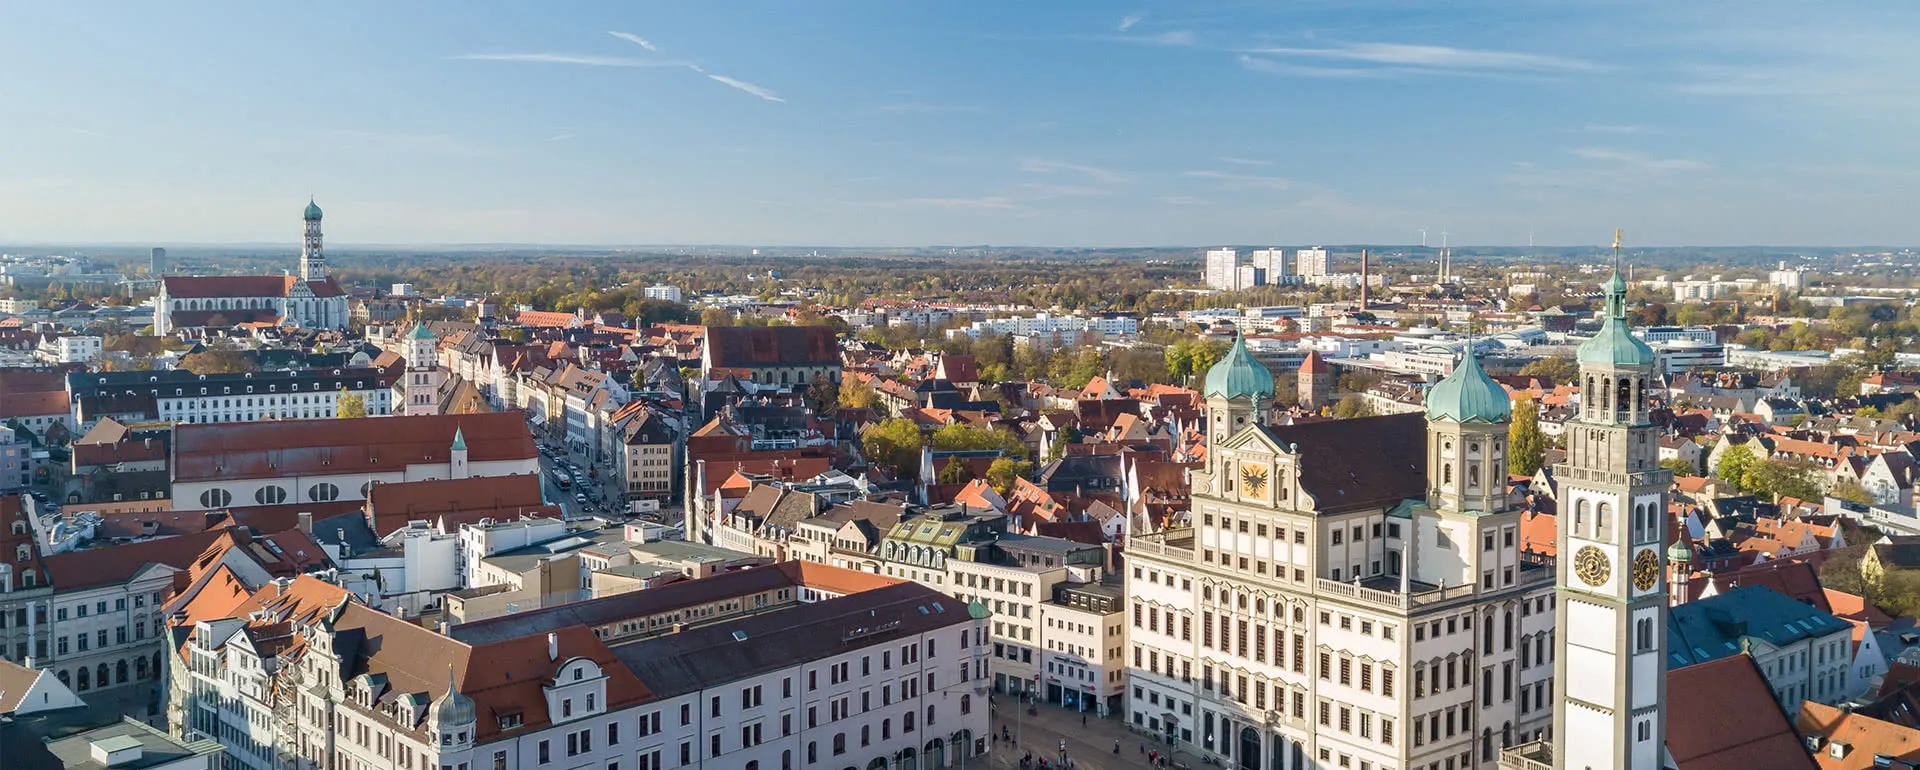 Augsburg - the destination with youth hostels